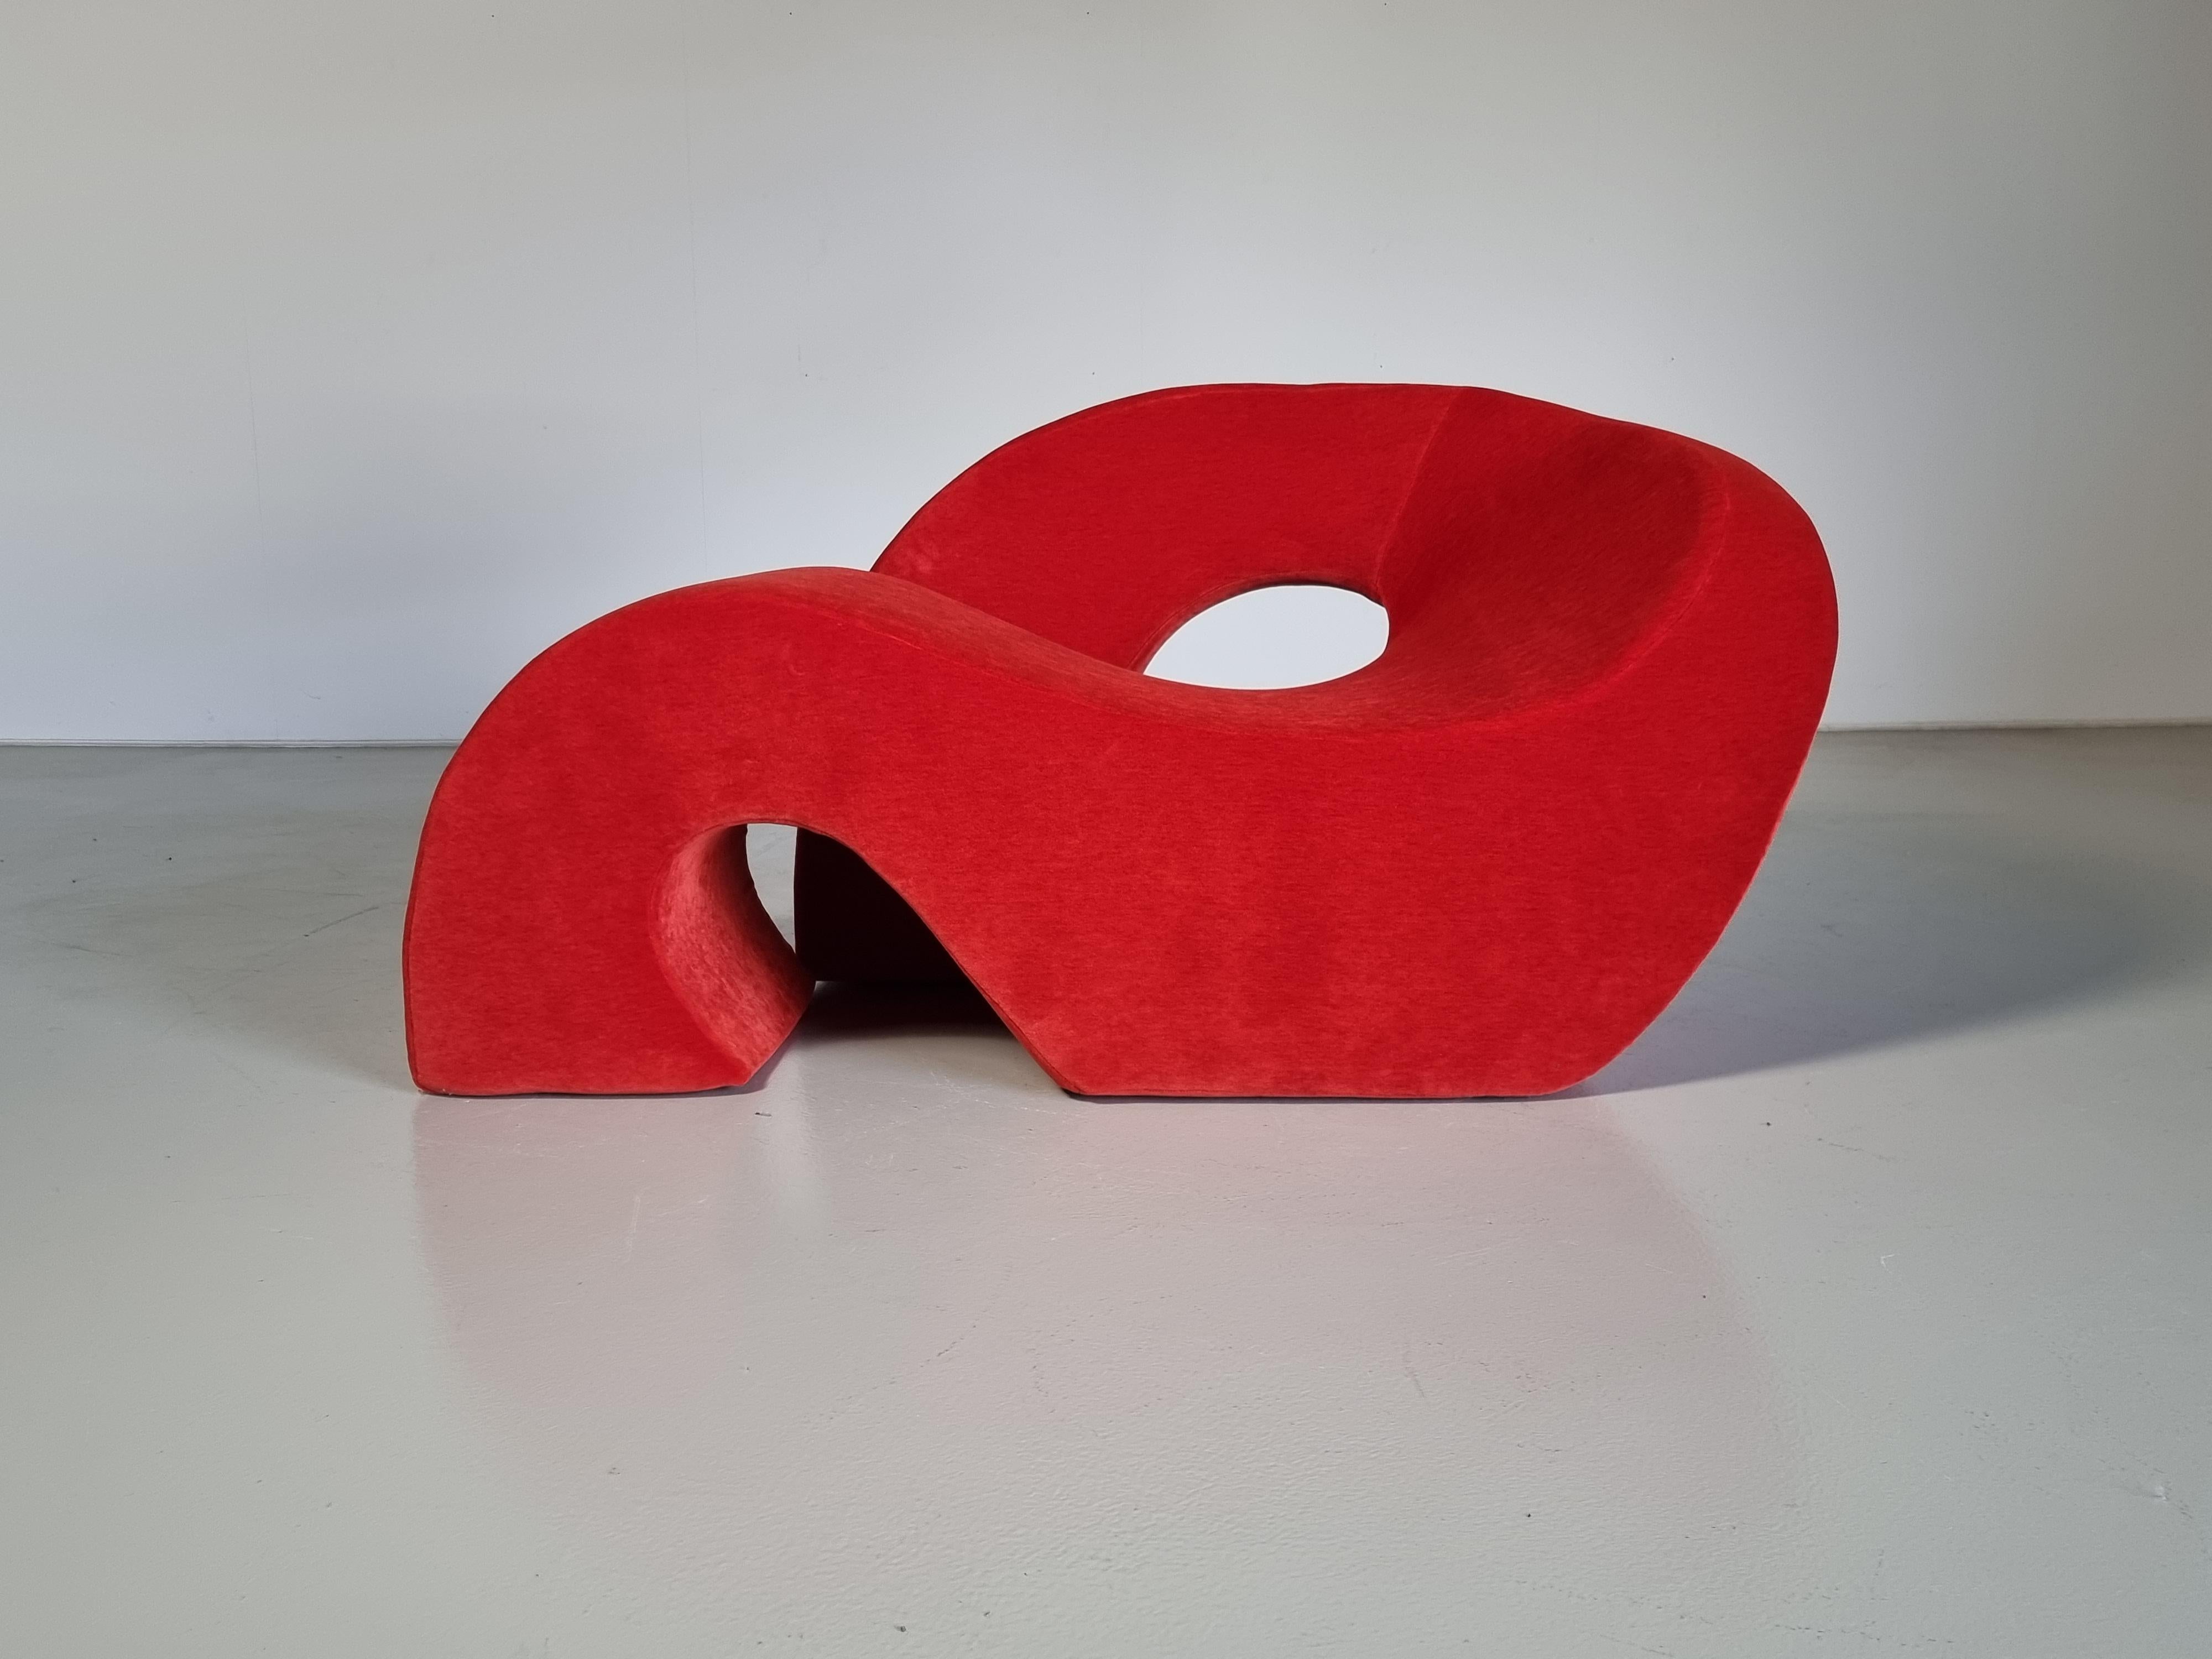 Sess lounge chair by Nani Prina for Sormani, 1968 

A very rare loop-shaped 'Sess' lounge/object chair by Nani Prina for Sormani, Italy. Designed in 1968. New cotton orange/red cotton velvet upholstery on a molded polyurethane frame.

The Sess